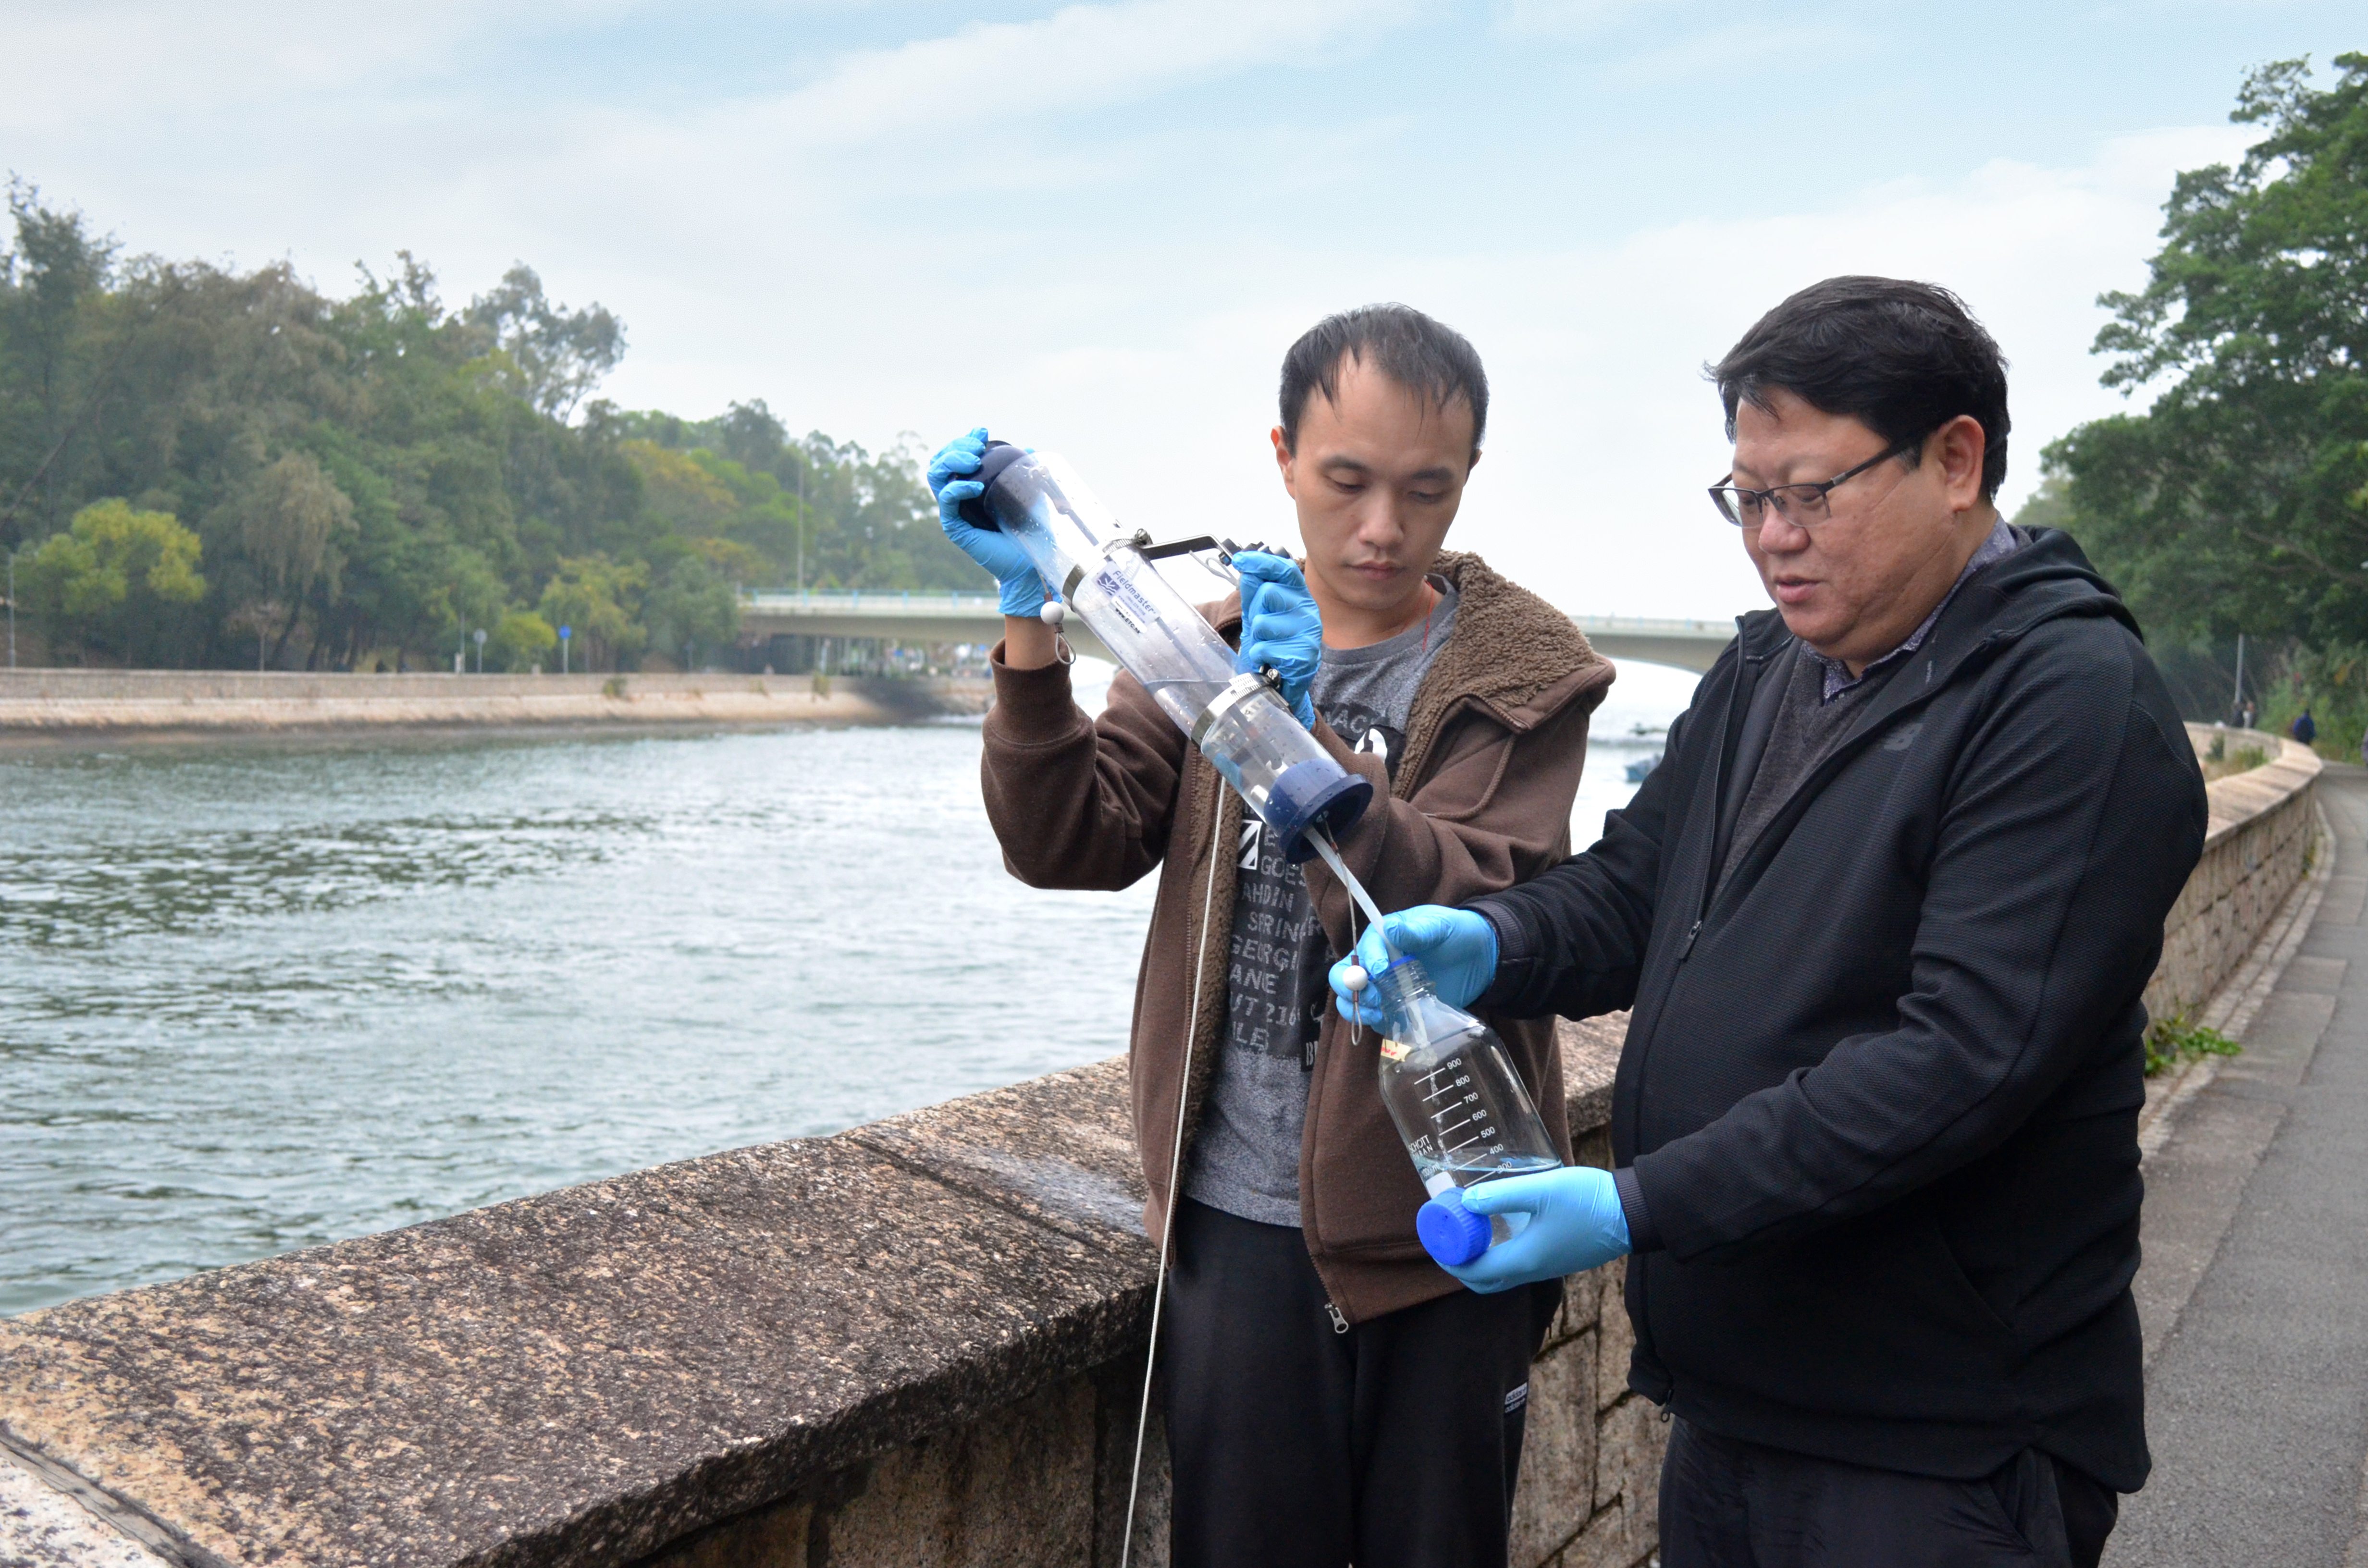 SCMP: Antibiotics and diabetic medication among record number of pharmaceutical pollutants found in Hong Kong river by global study